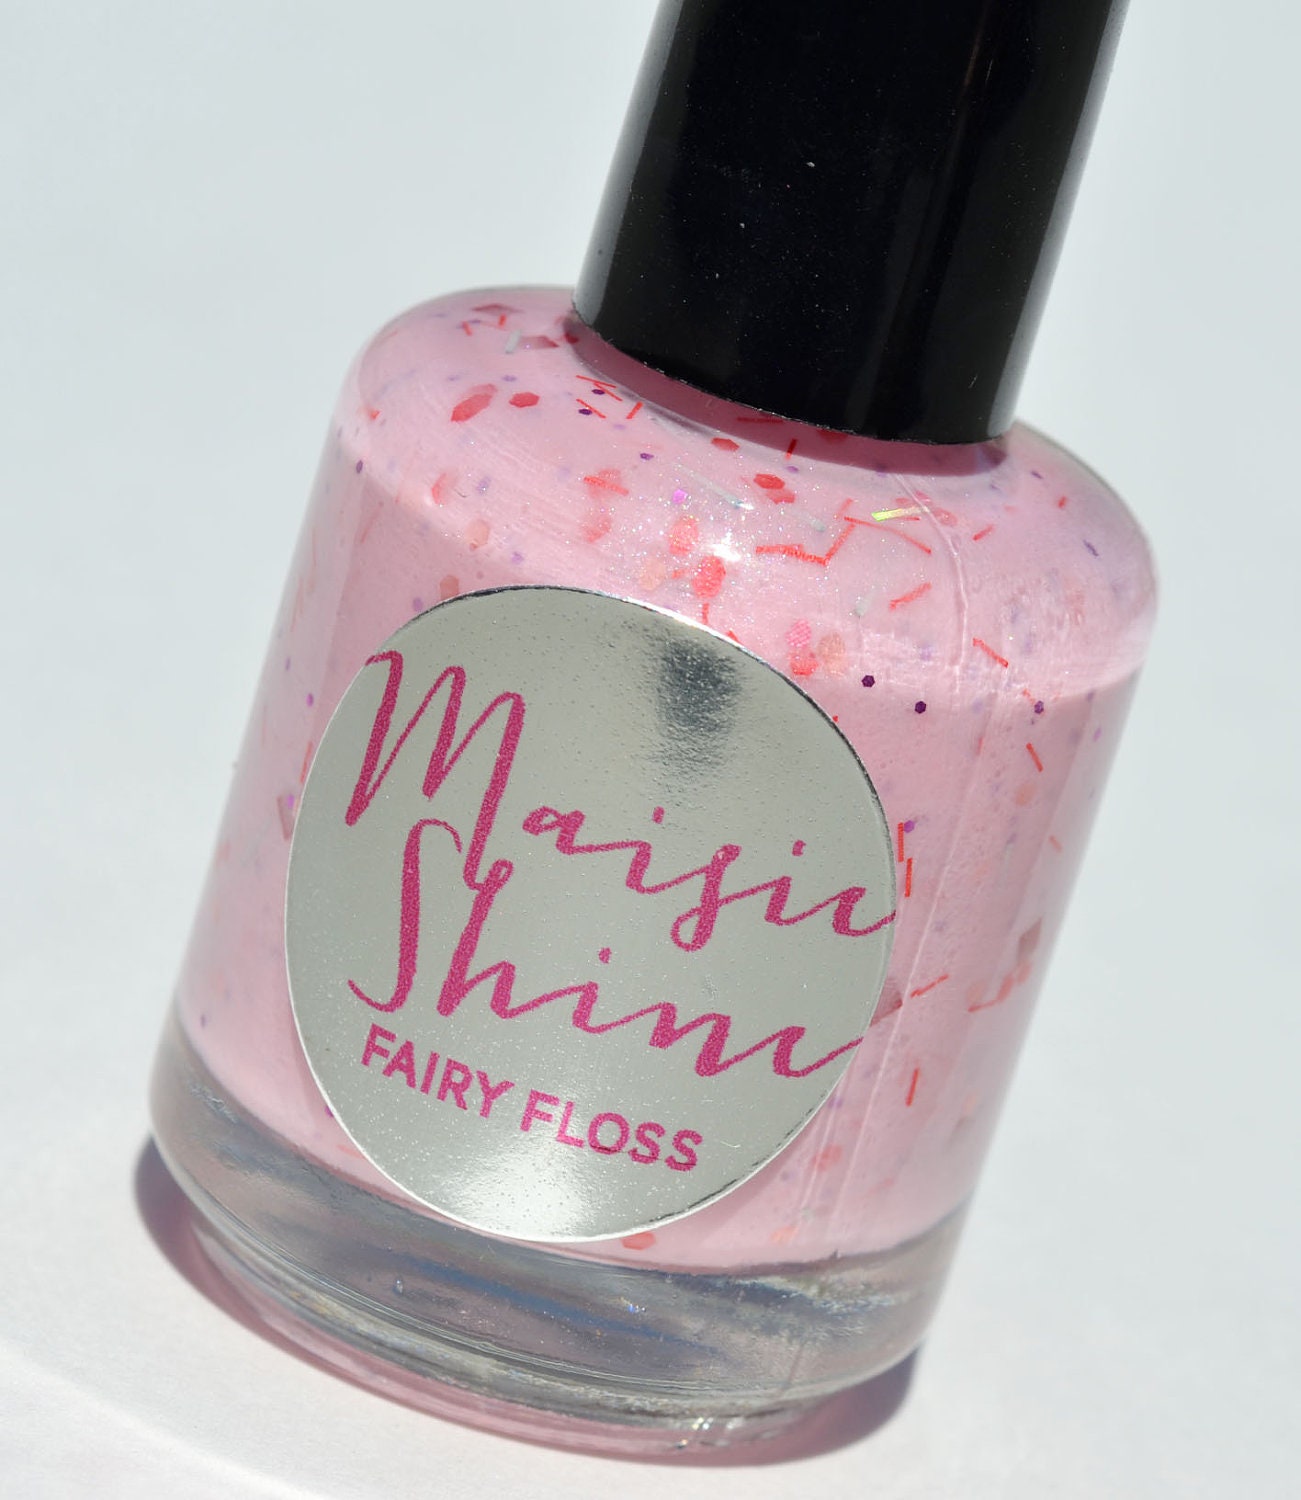 Nail Polish: Fairy Floss - Milky Cotton Candy Pink with Glitters